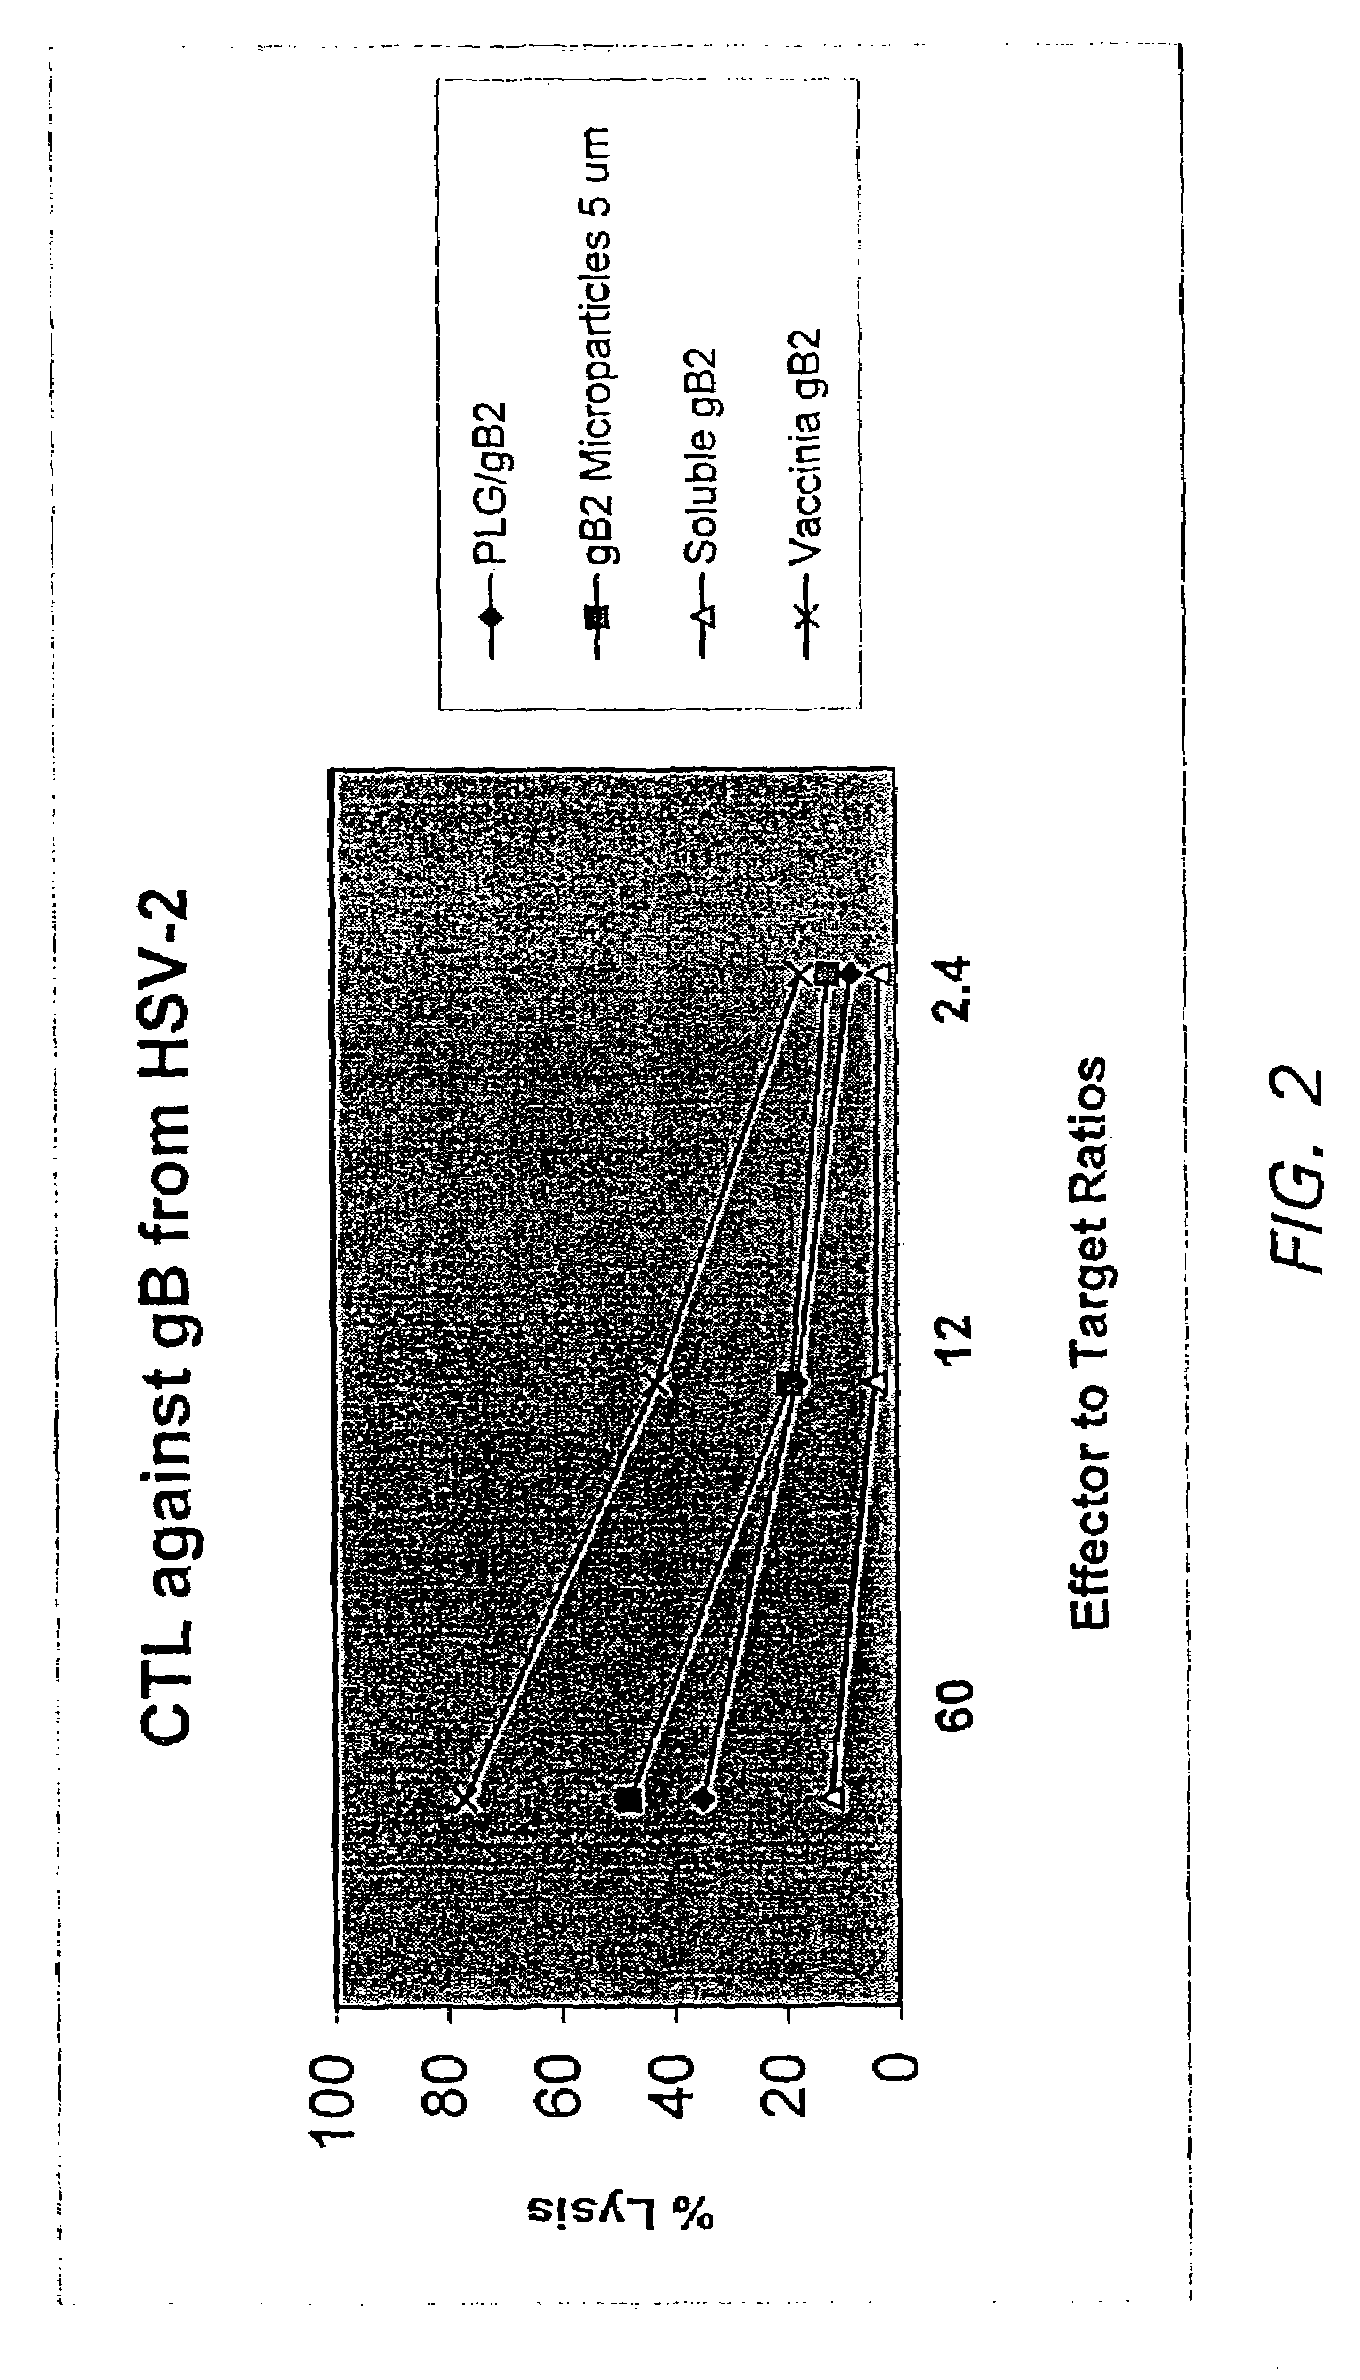 Method of obtaining cellular immune responses from proteins